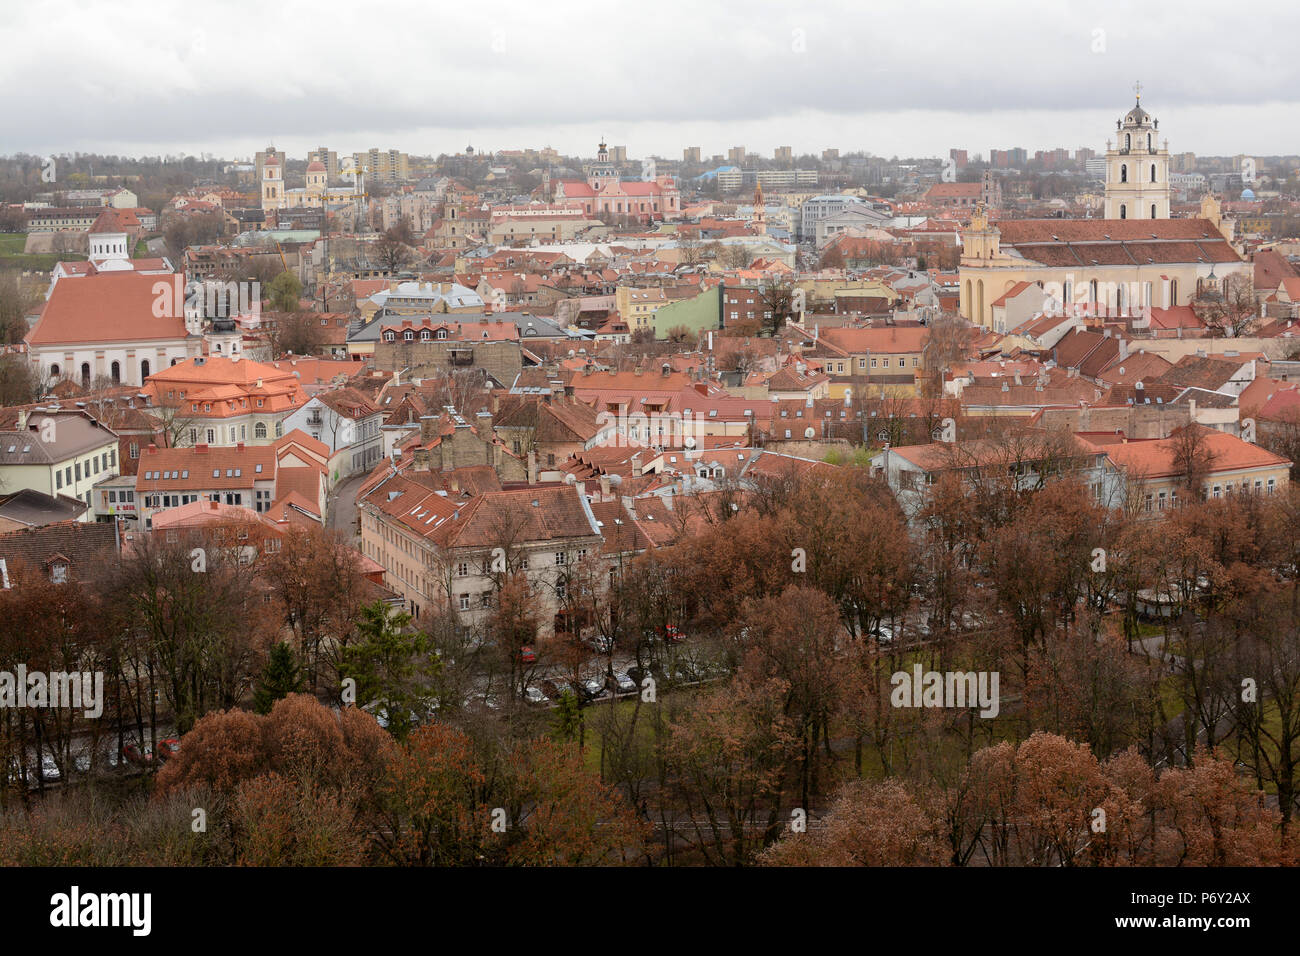 Old town overview, Vilnius, Lithuania, Europe Stock Photo